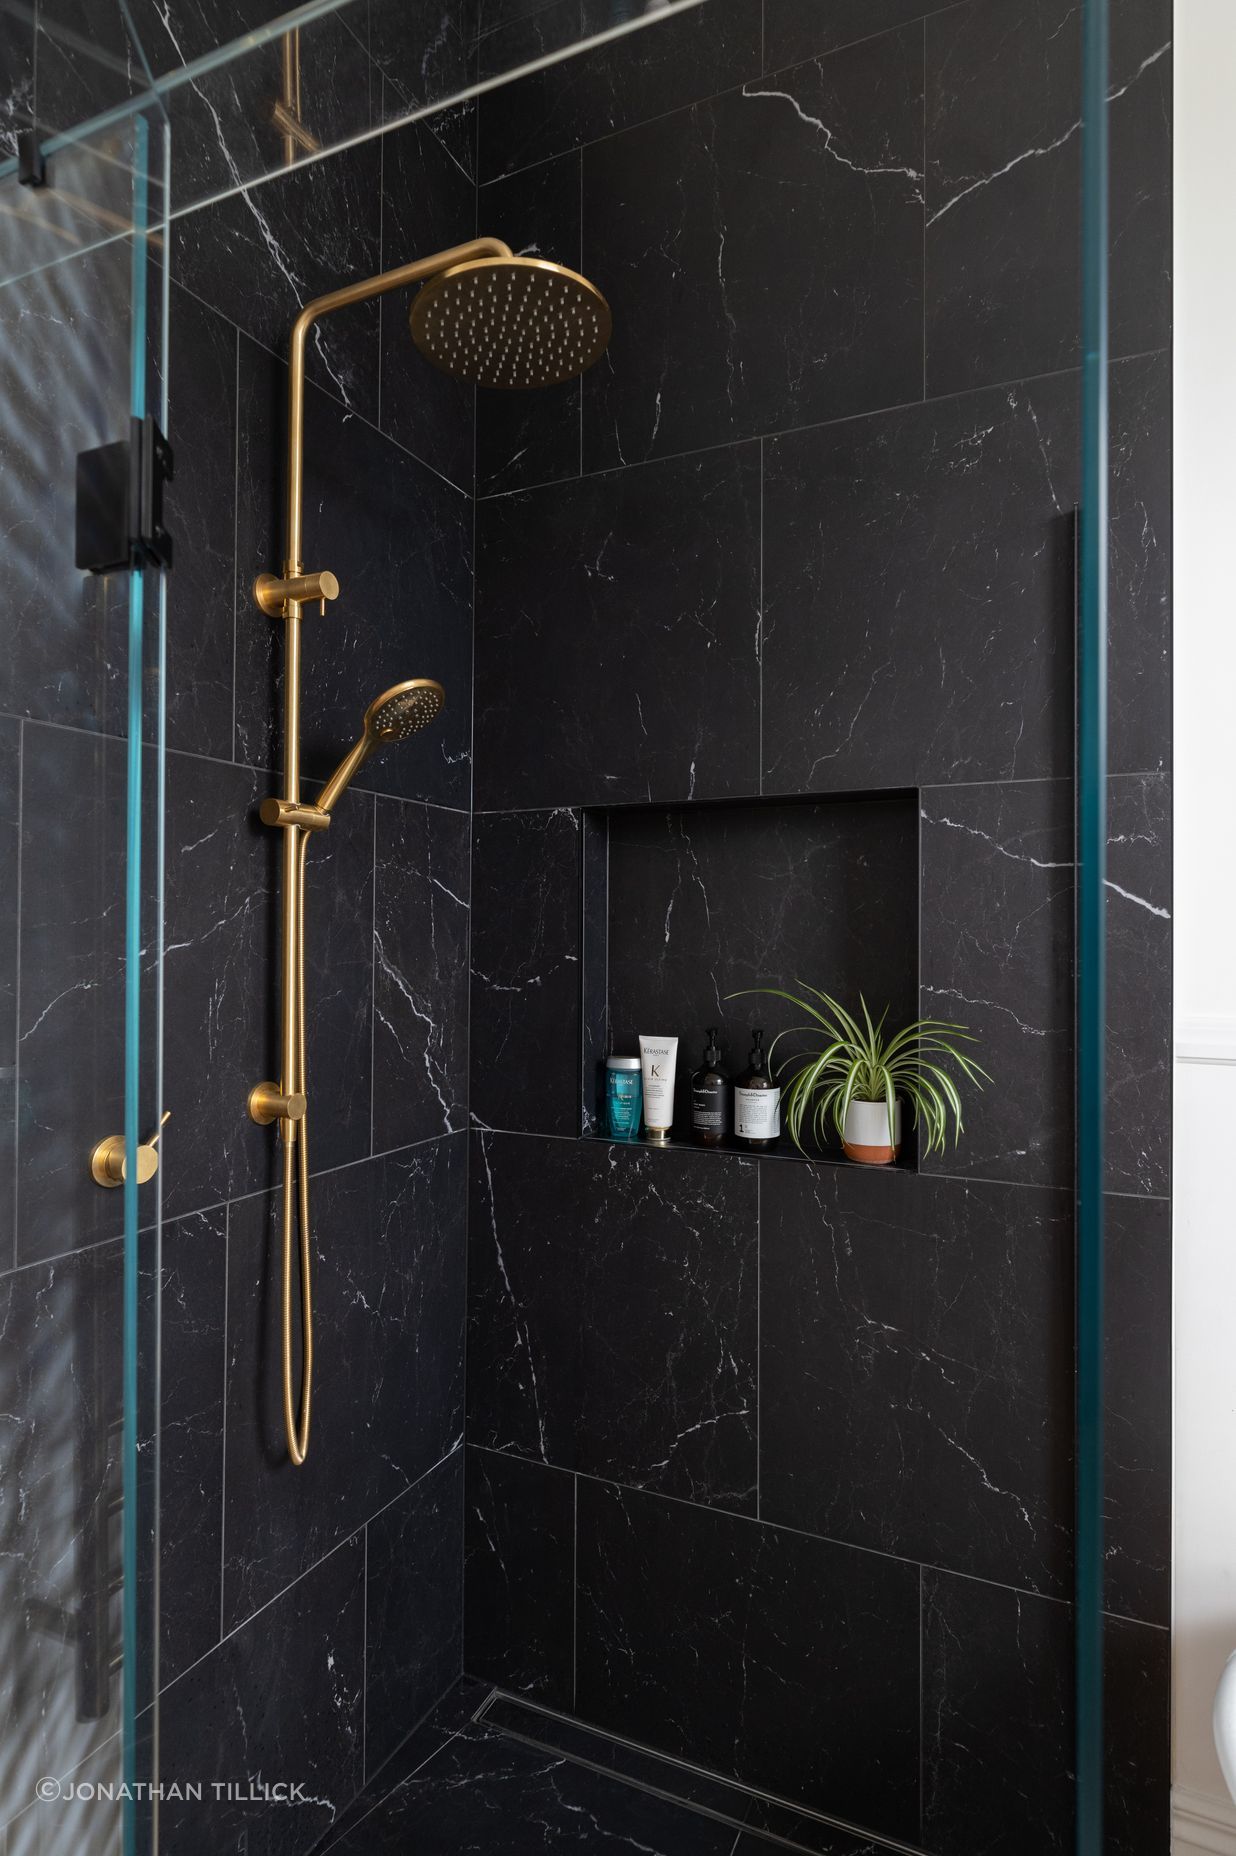 Brass tapware contrasts with the black tiles and complements the home's heritage features.